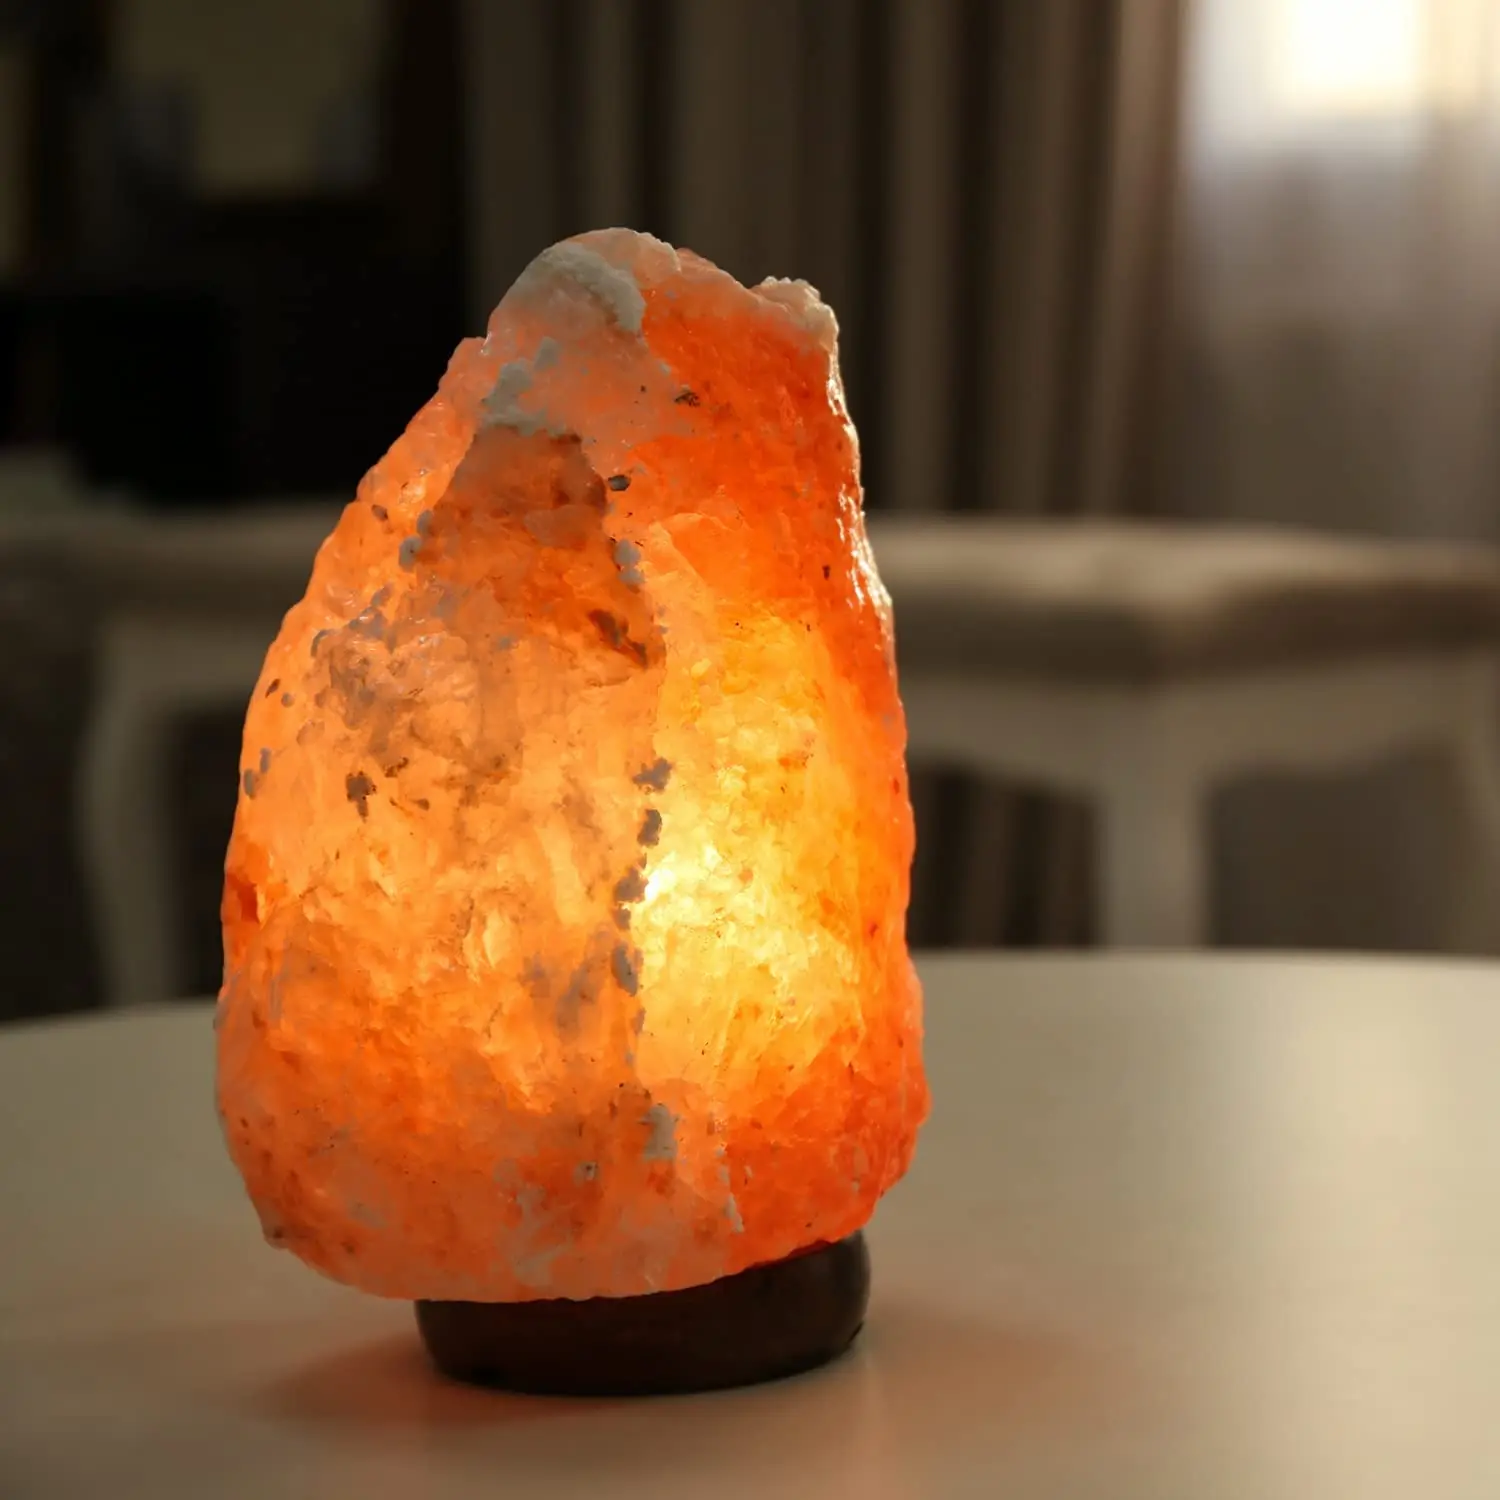 

5 Inch 1-2 KG 100% Himalayan Crystal Rock Salt Lamp with Dimmer Cord - Night Light Natural Crystal Rock Classic Wood Base